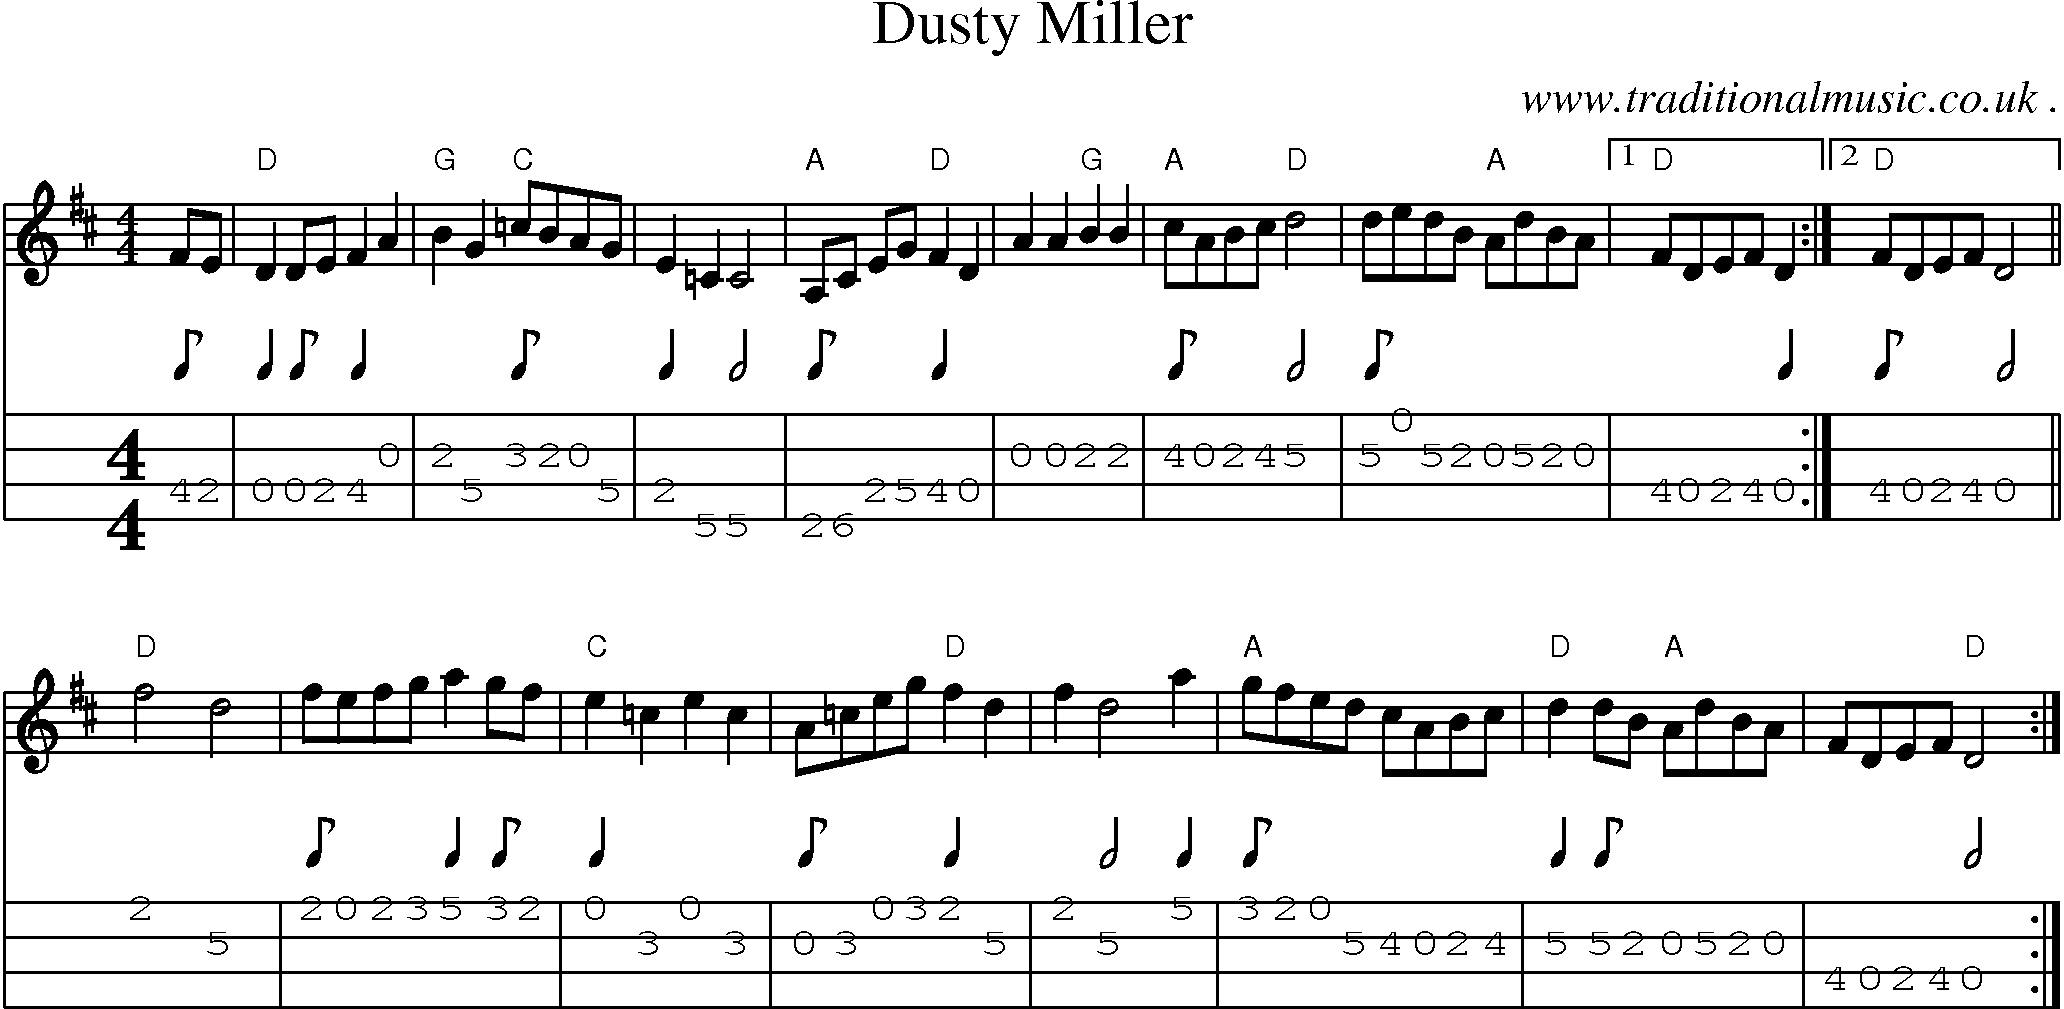 Music Score and Mandolin Tabs for Dusty Miller